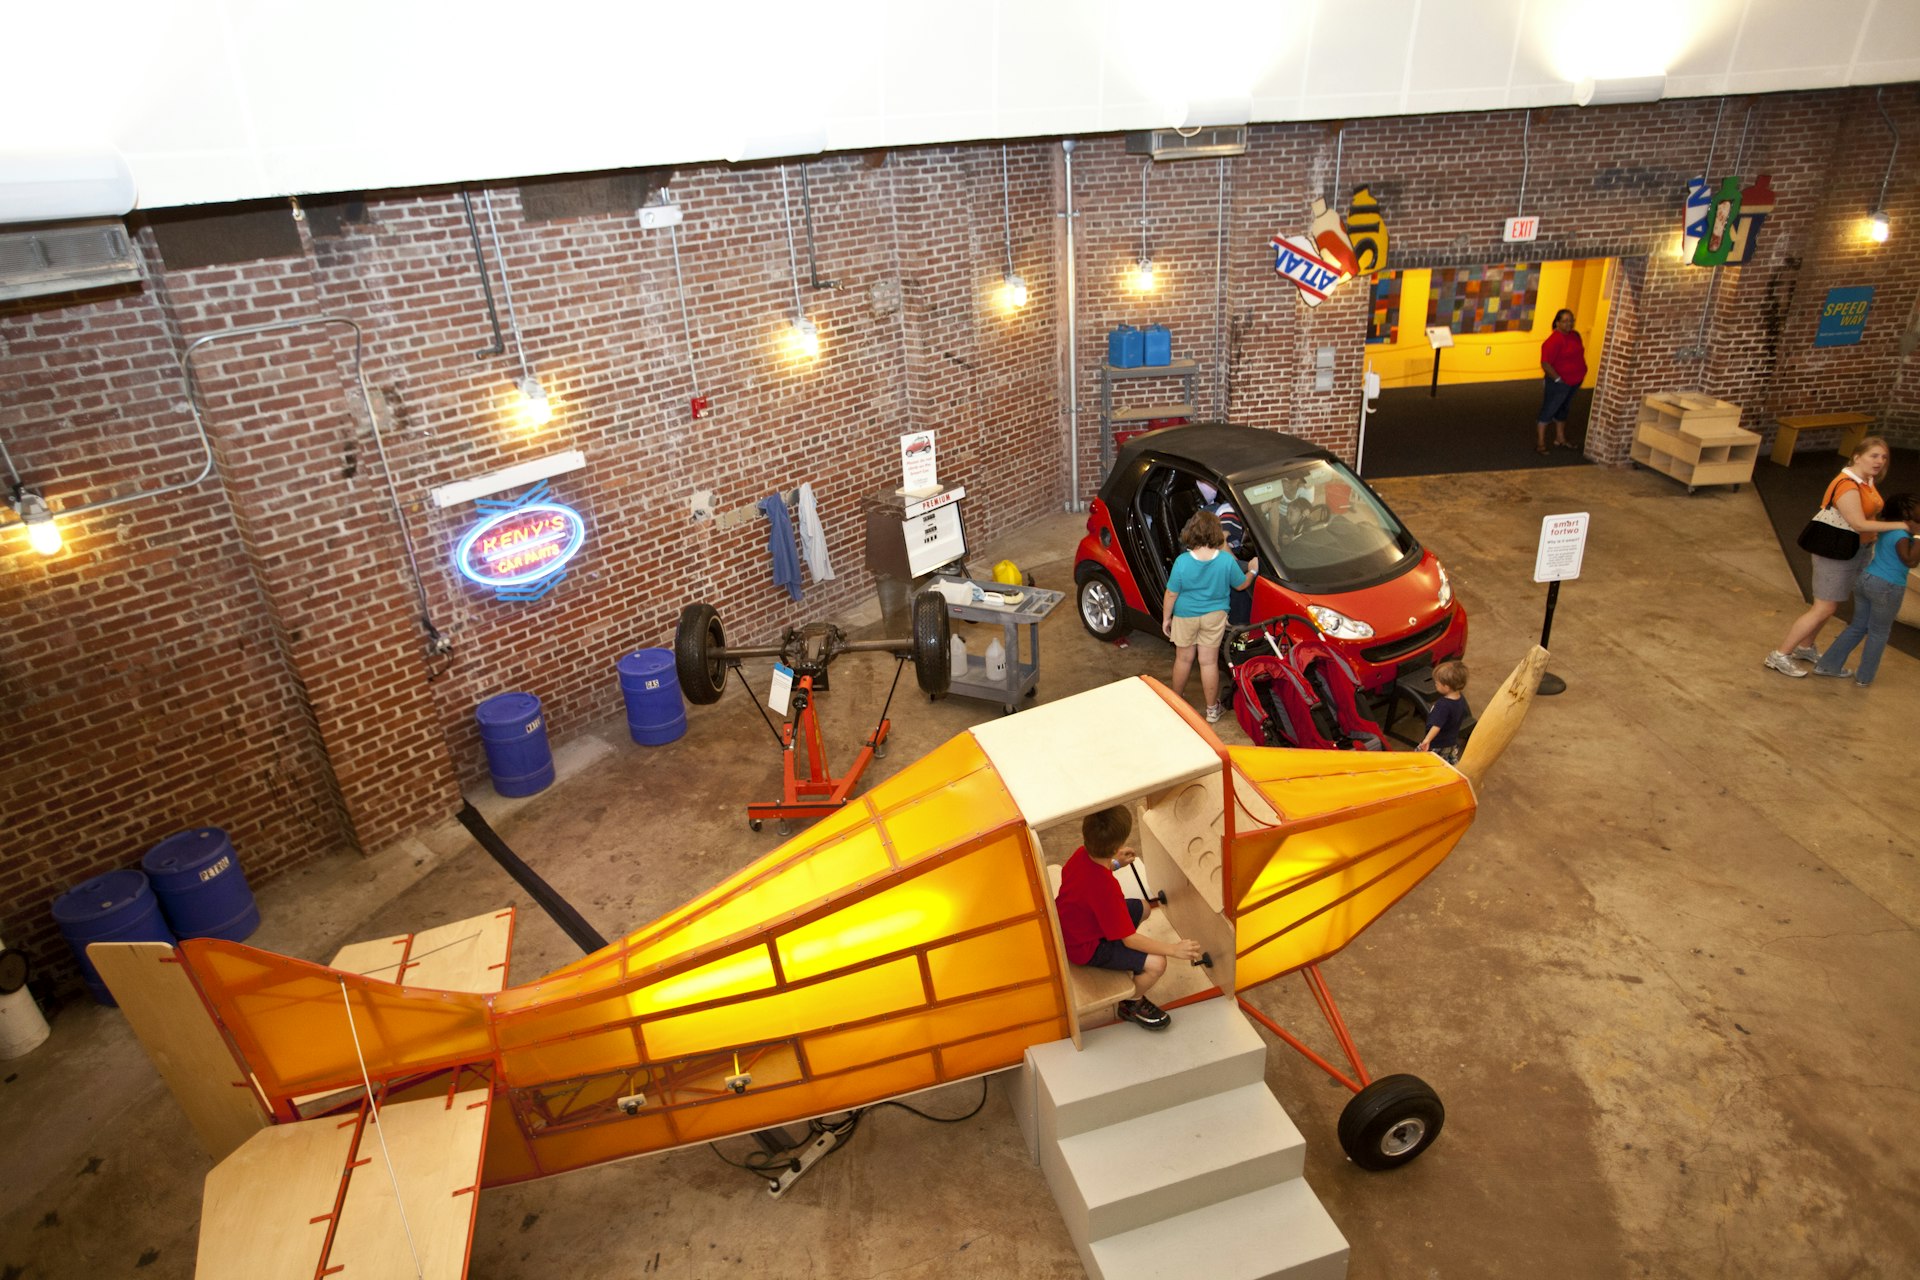 A little boy sits in a life size toy airplane while other children play with a small car at the Children's Museum of Pittsburgh